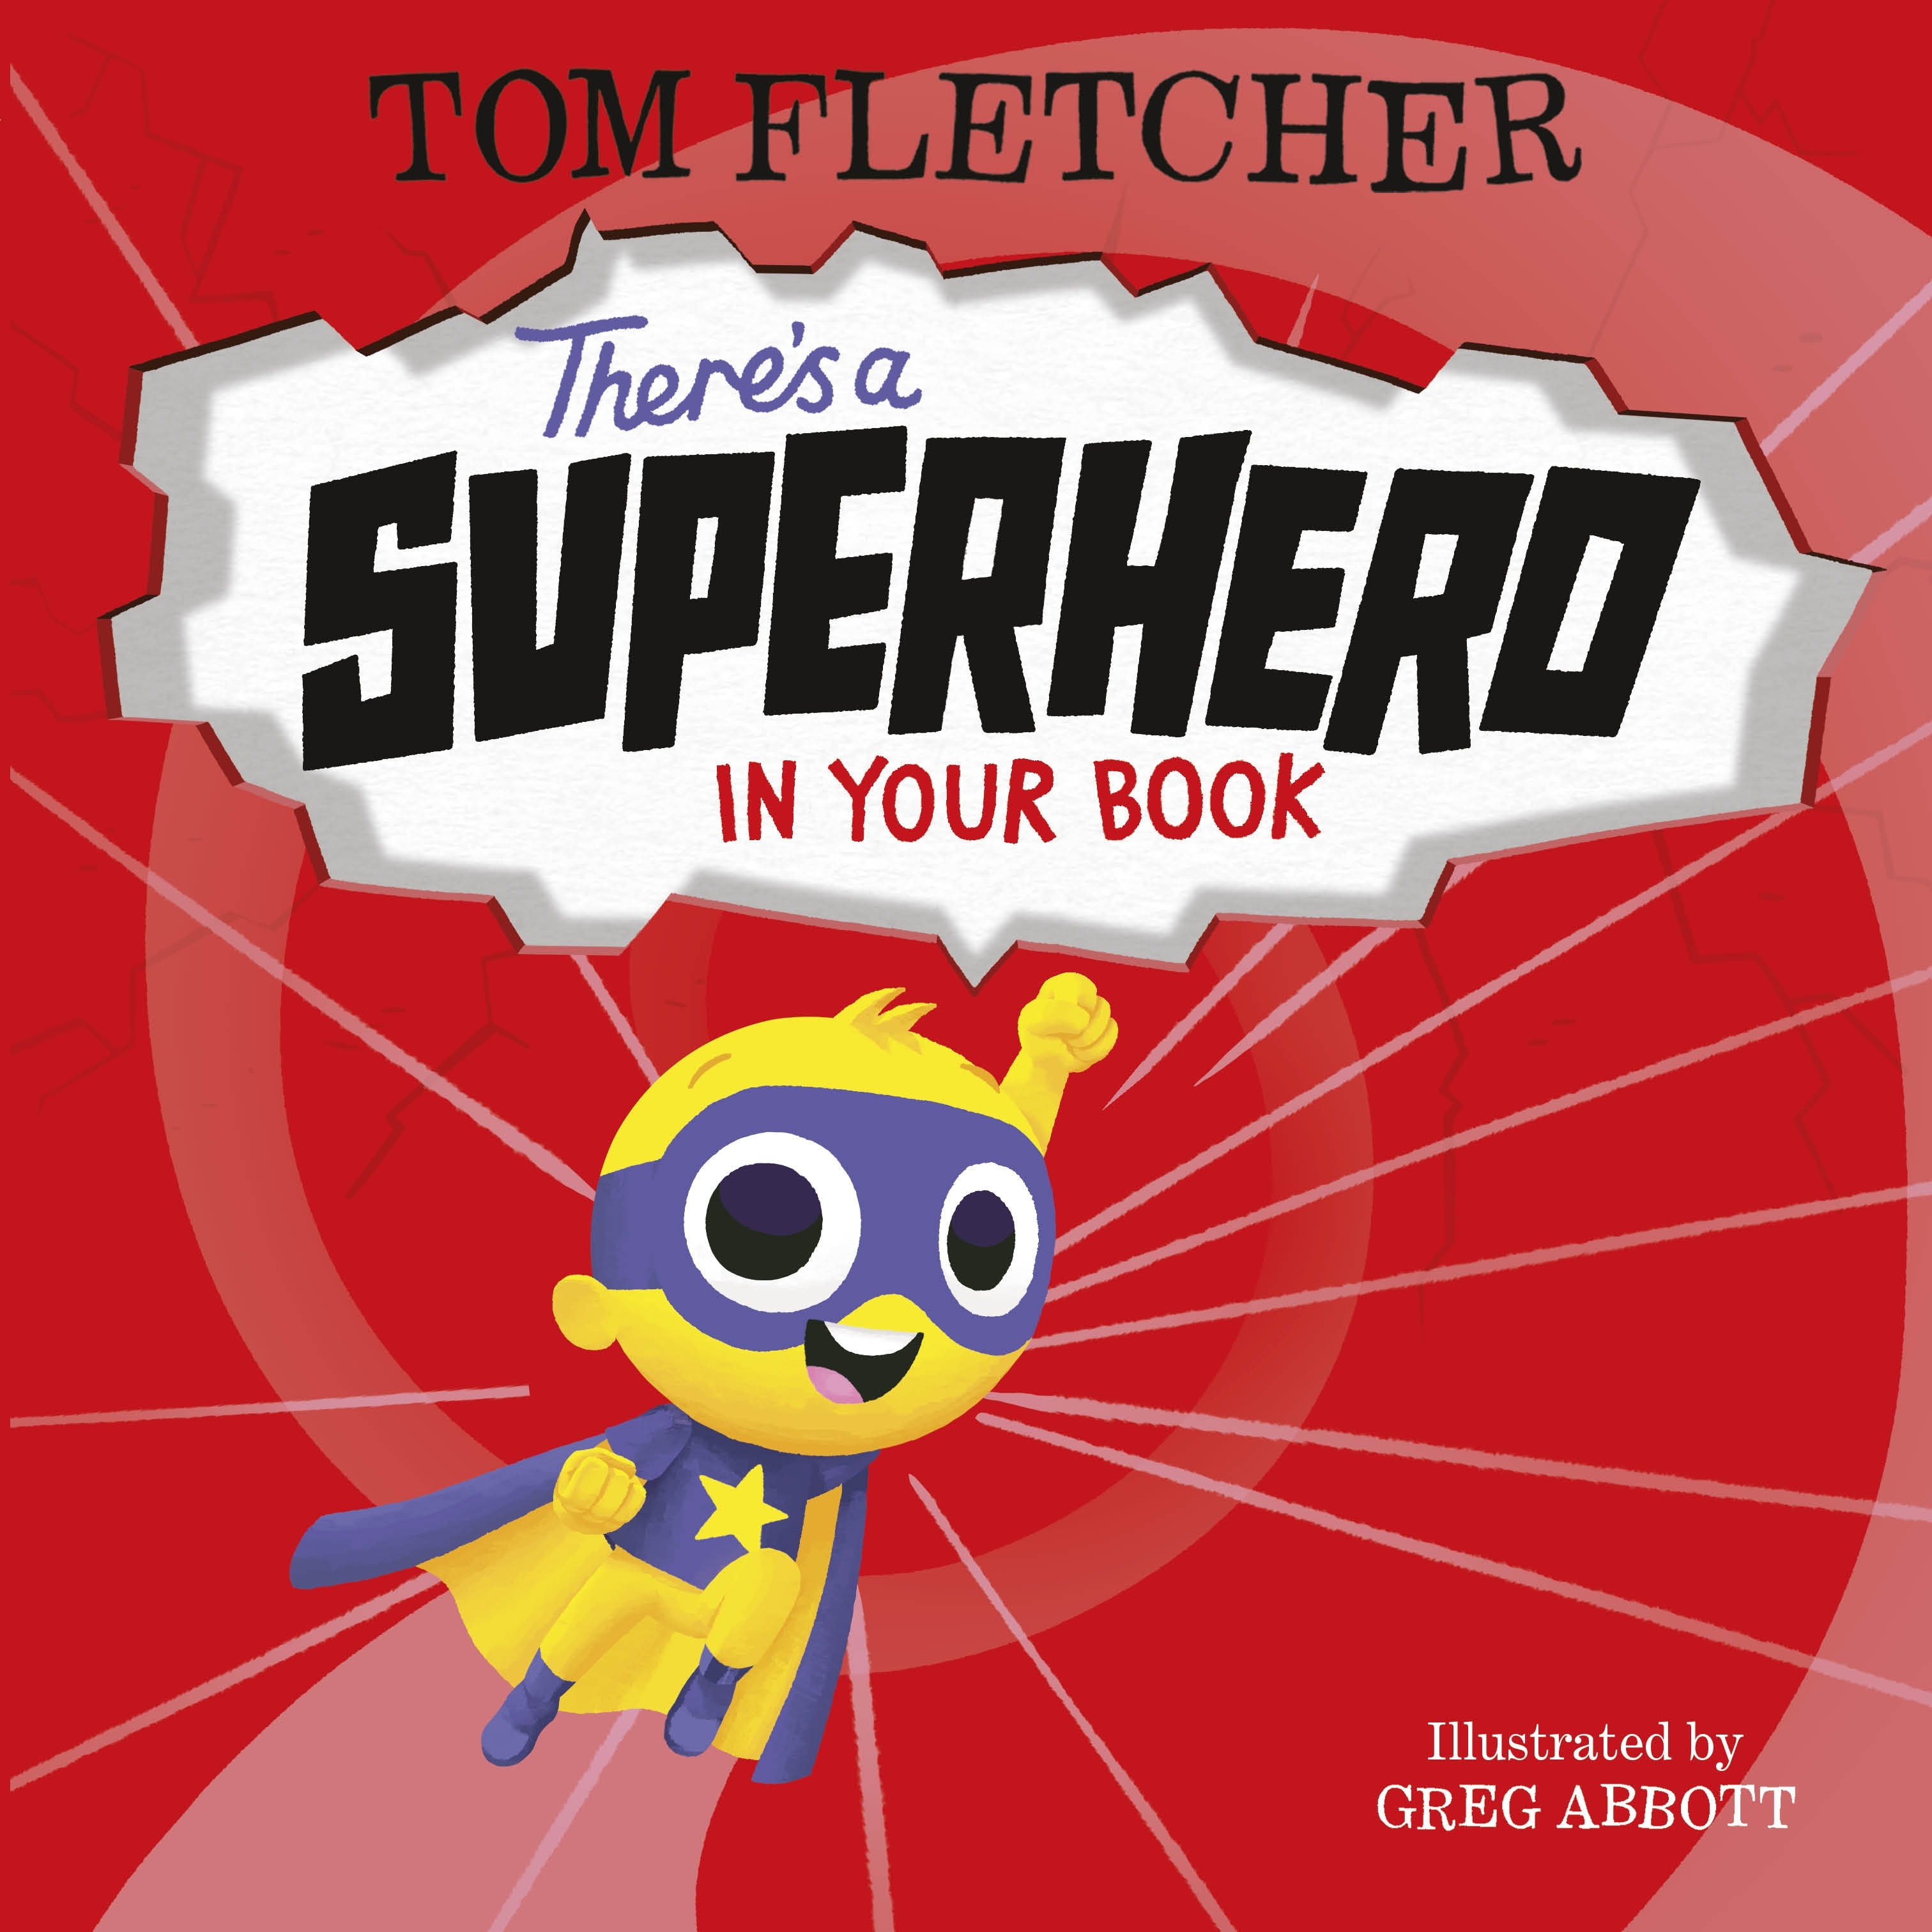 Book “There's a Superhero in Your Book” by Tom Fletcher, Greg Abbott — July 23, 2020